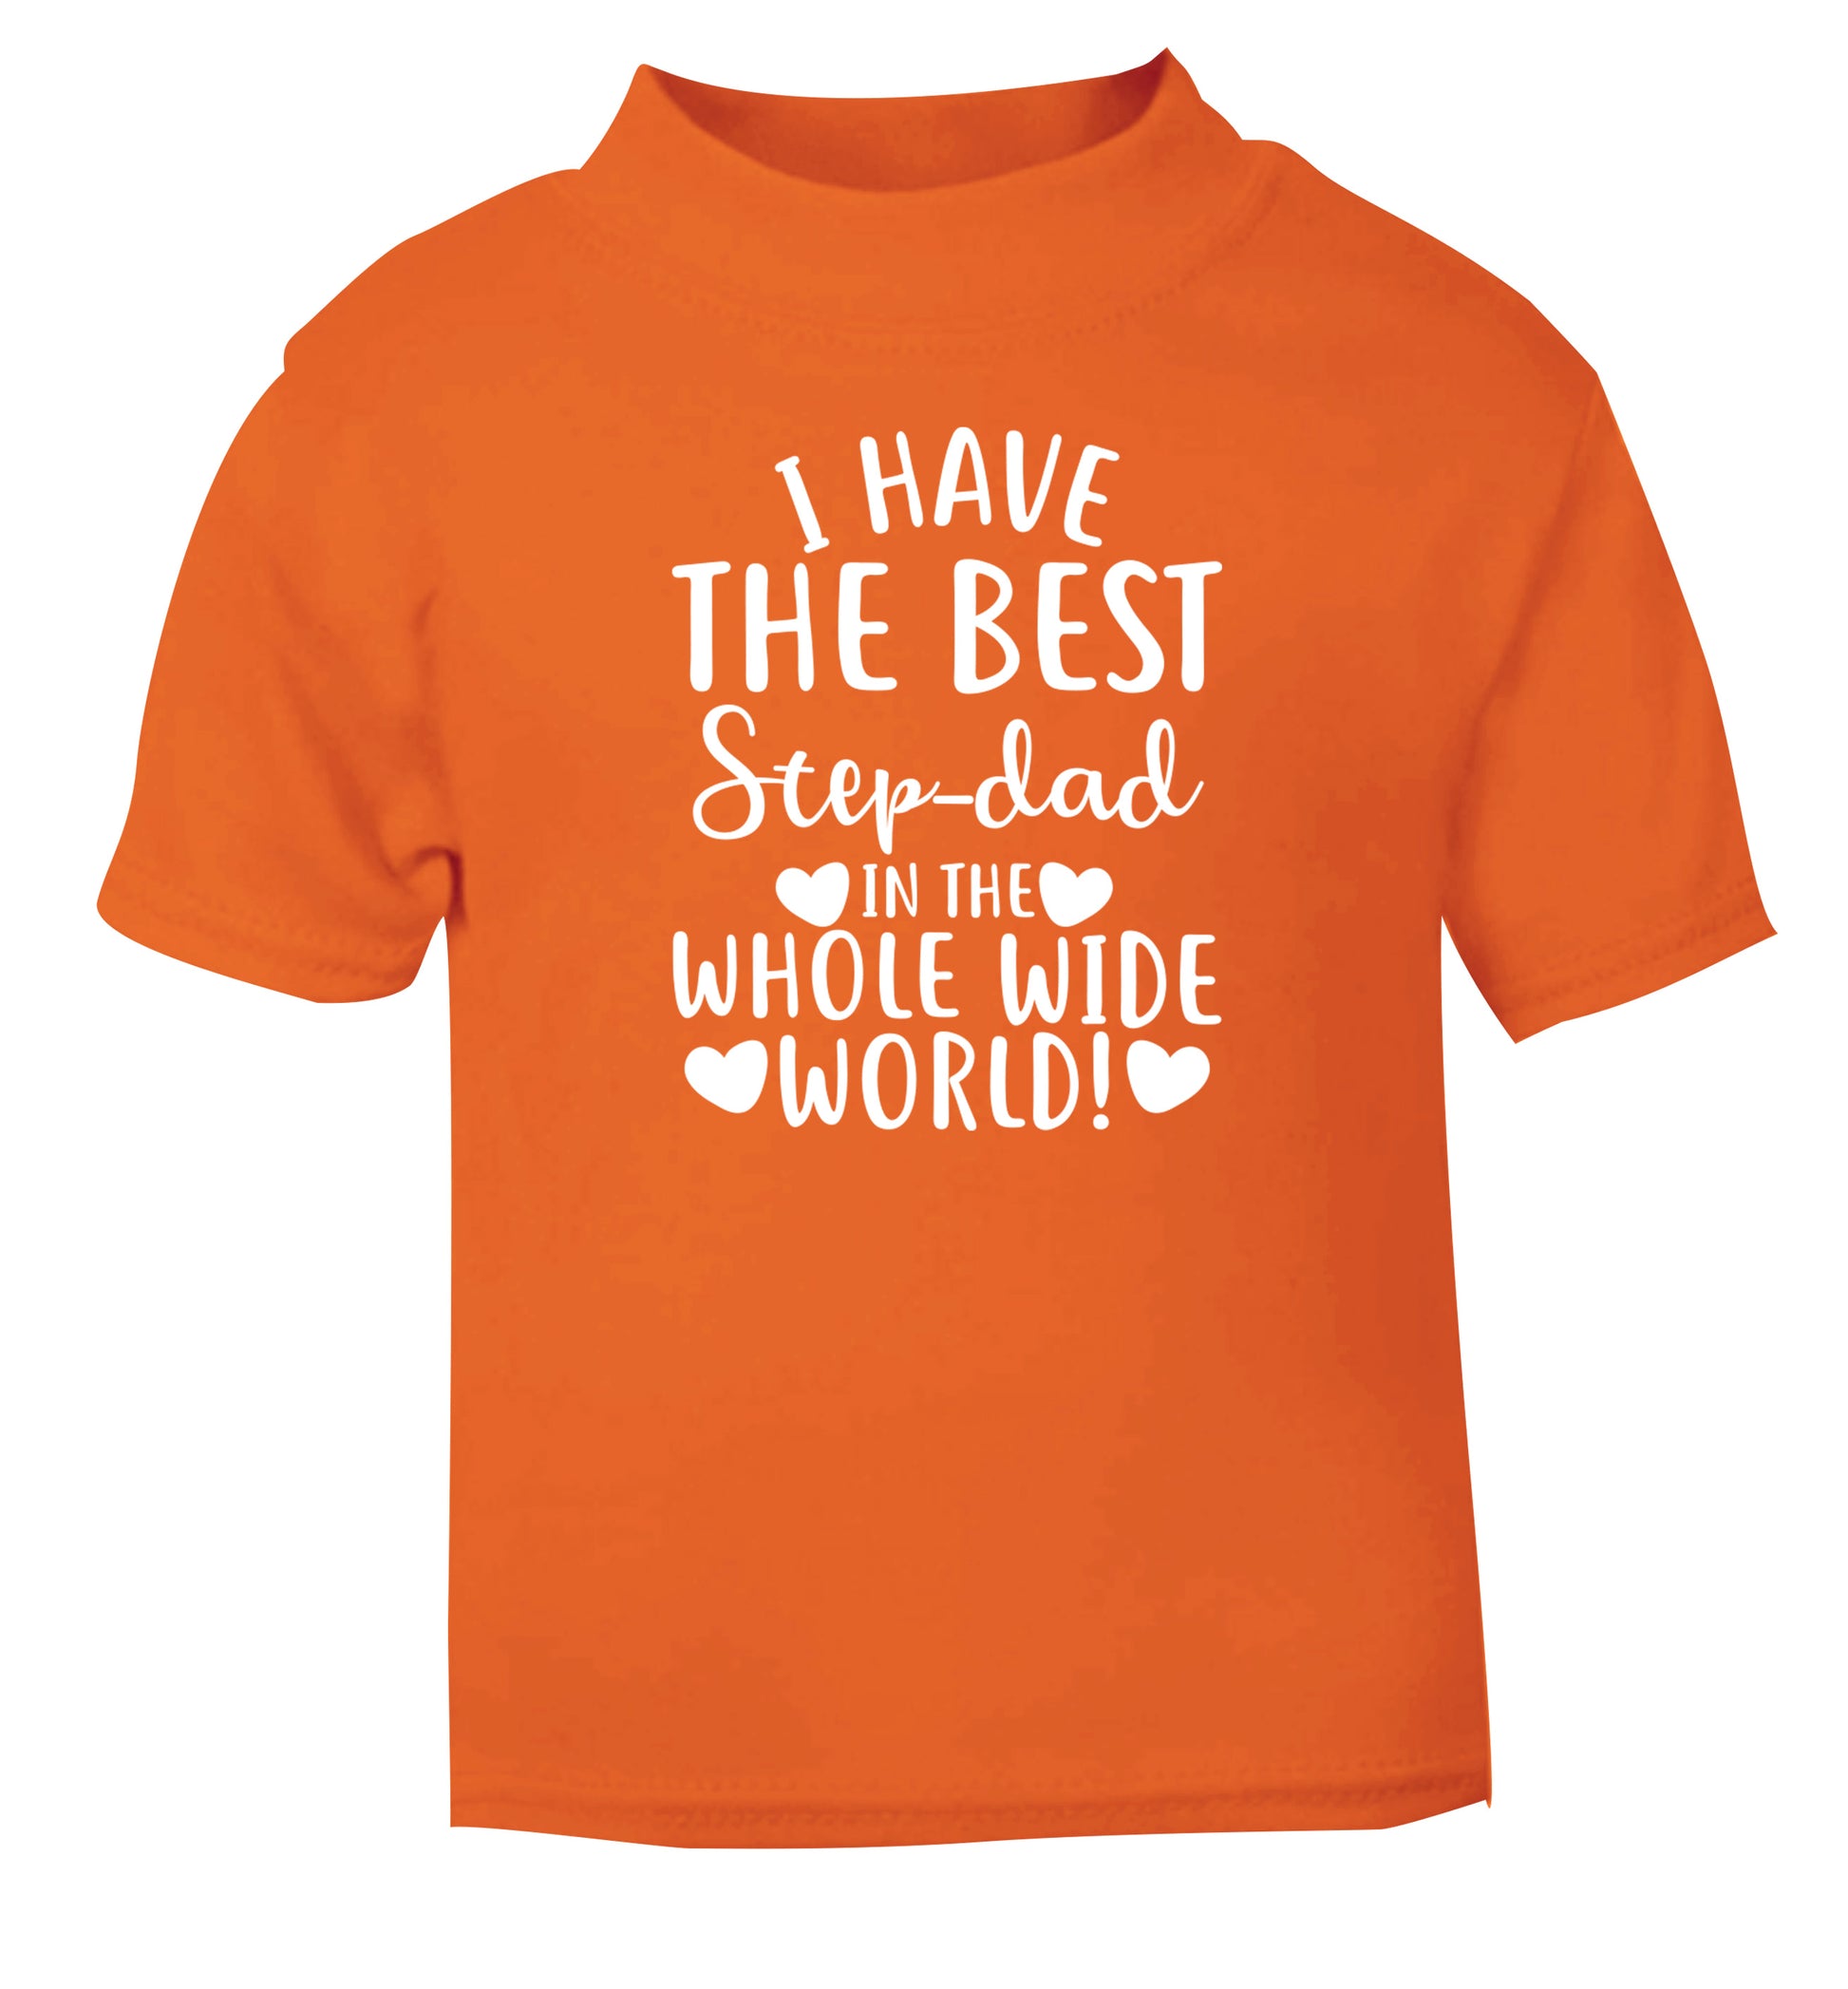 I have the best step-dad in the whole wide world! orange Baby Toddler Tshirt 2 Years